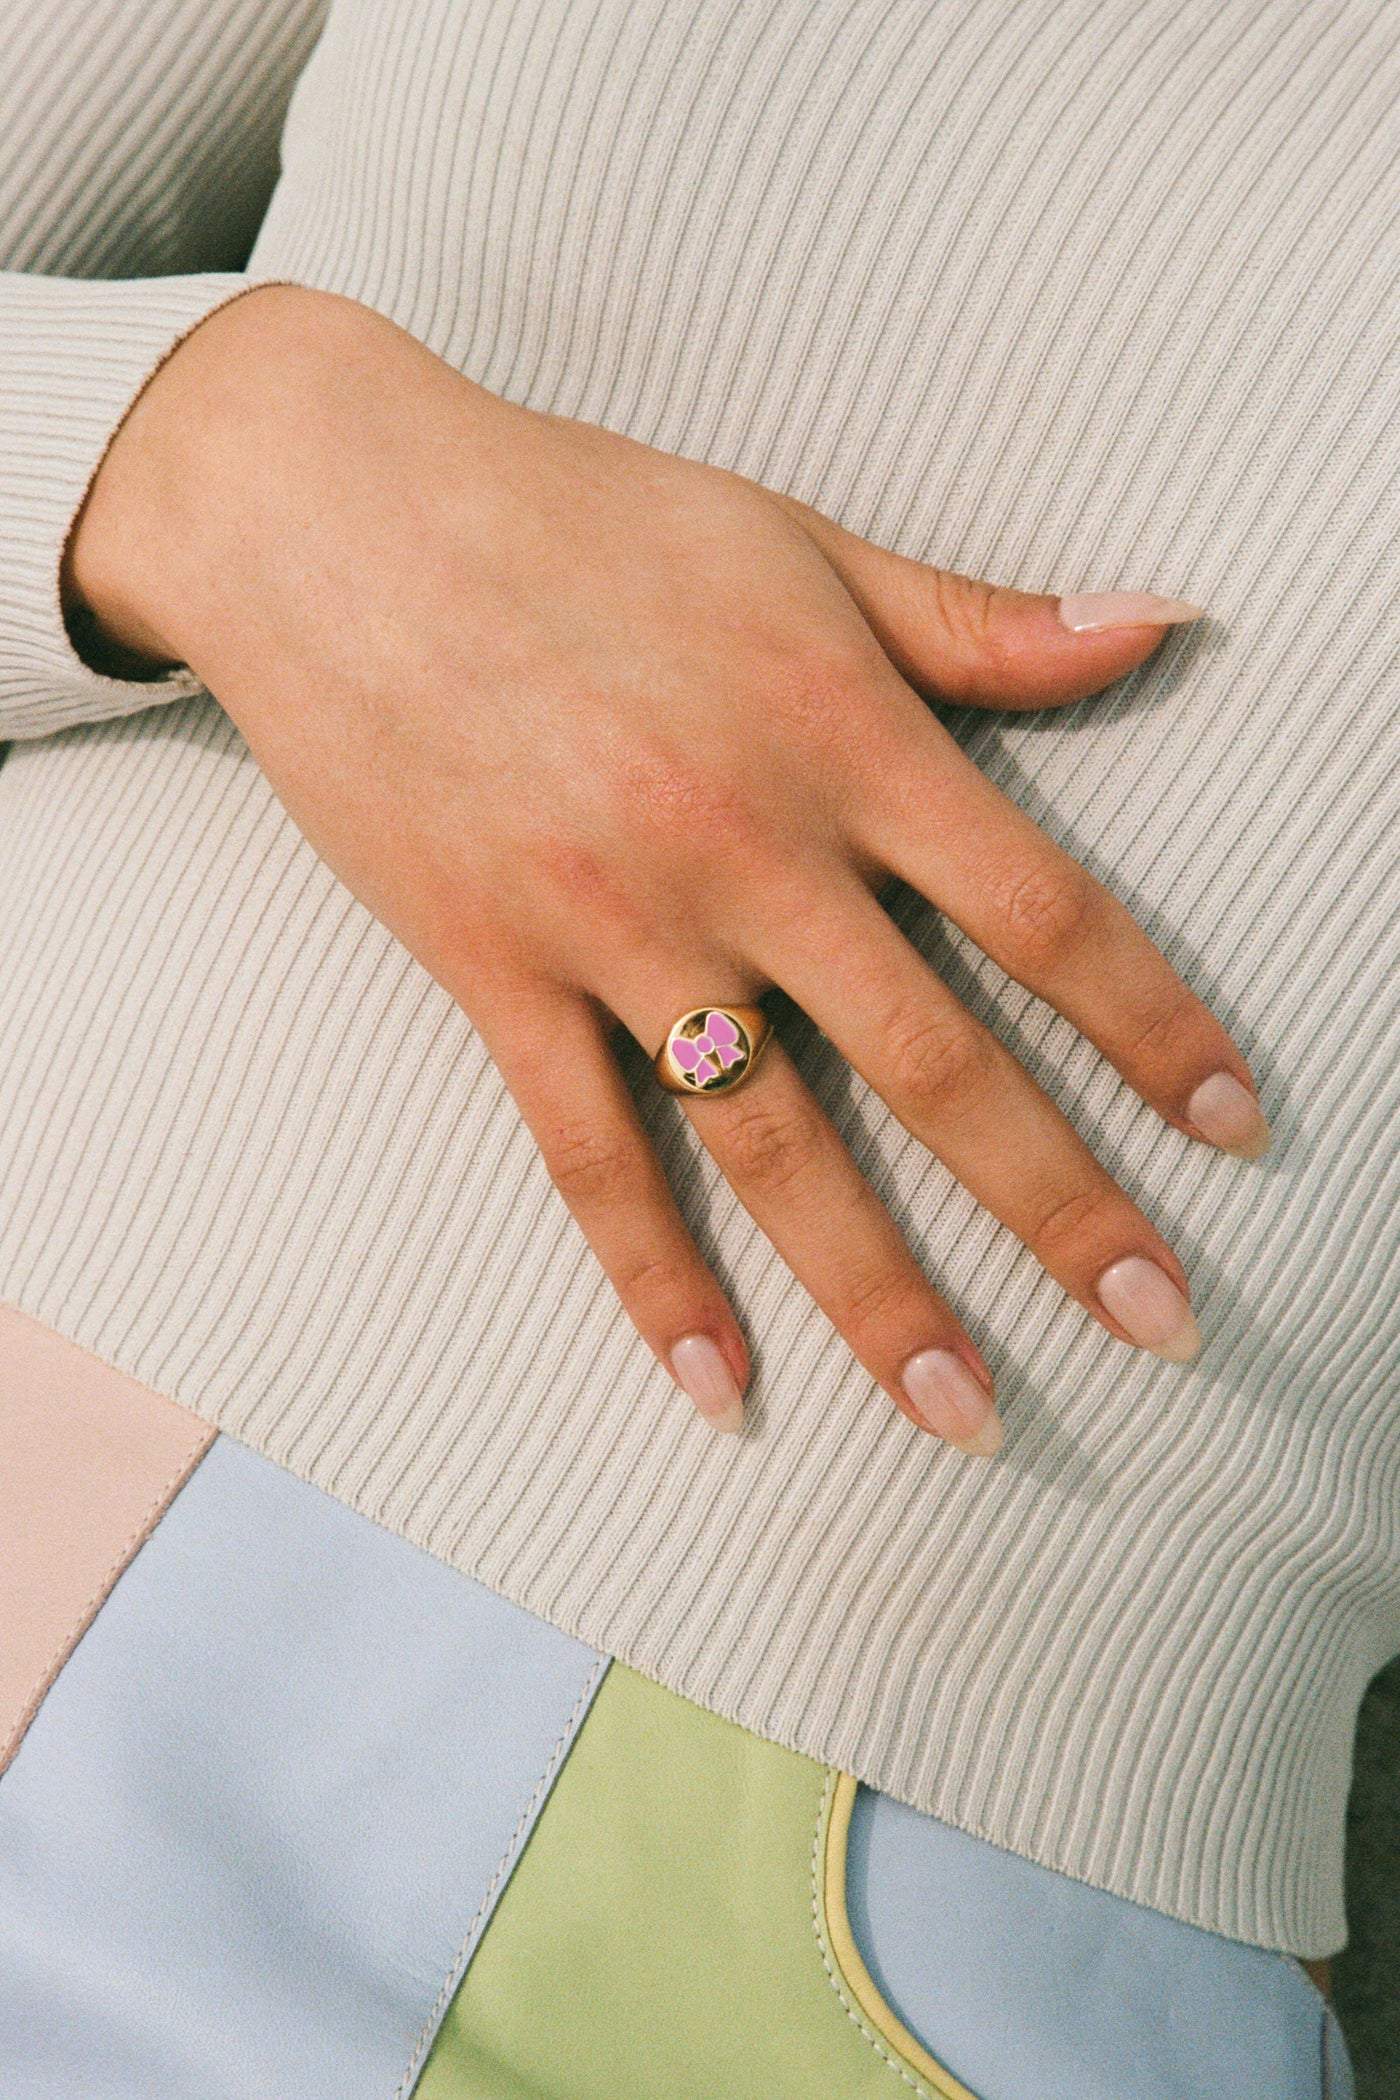 Pink Minnie Bow Signet Ring